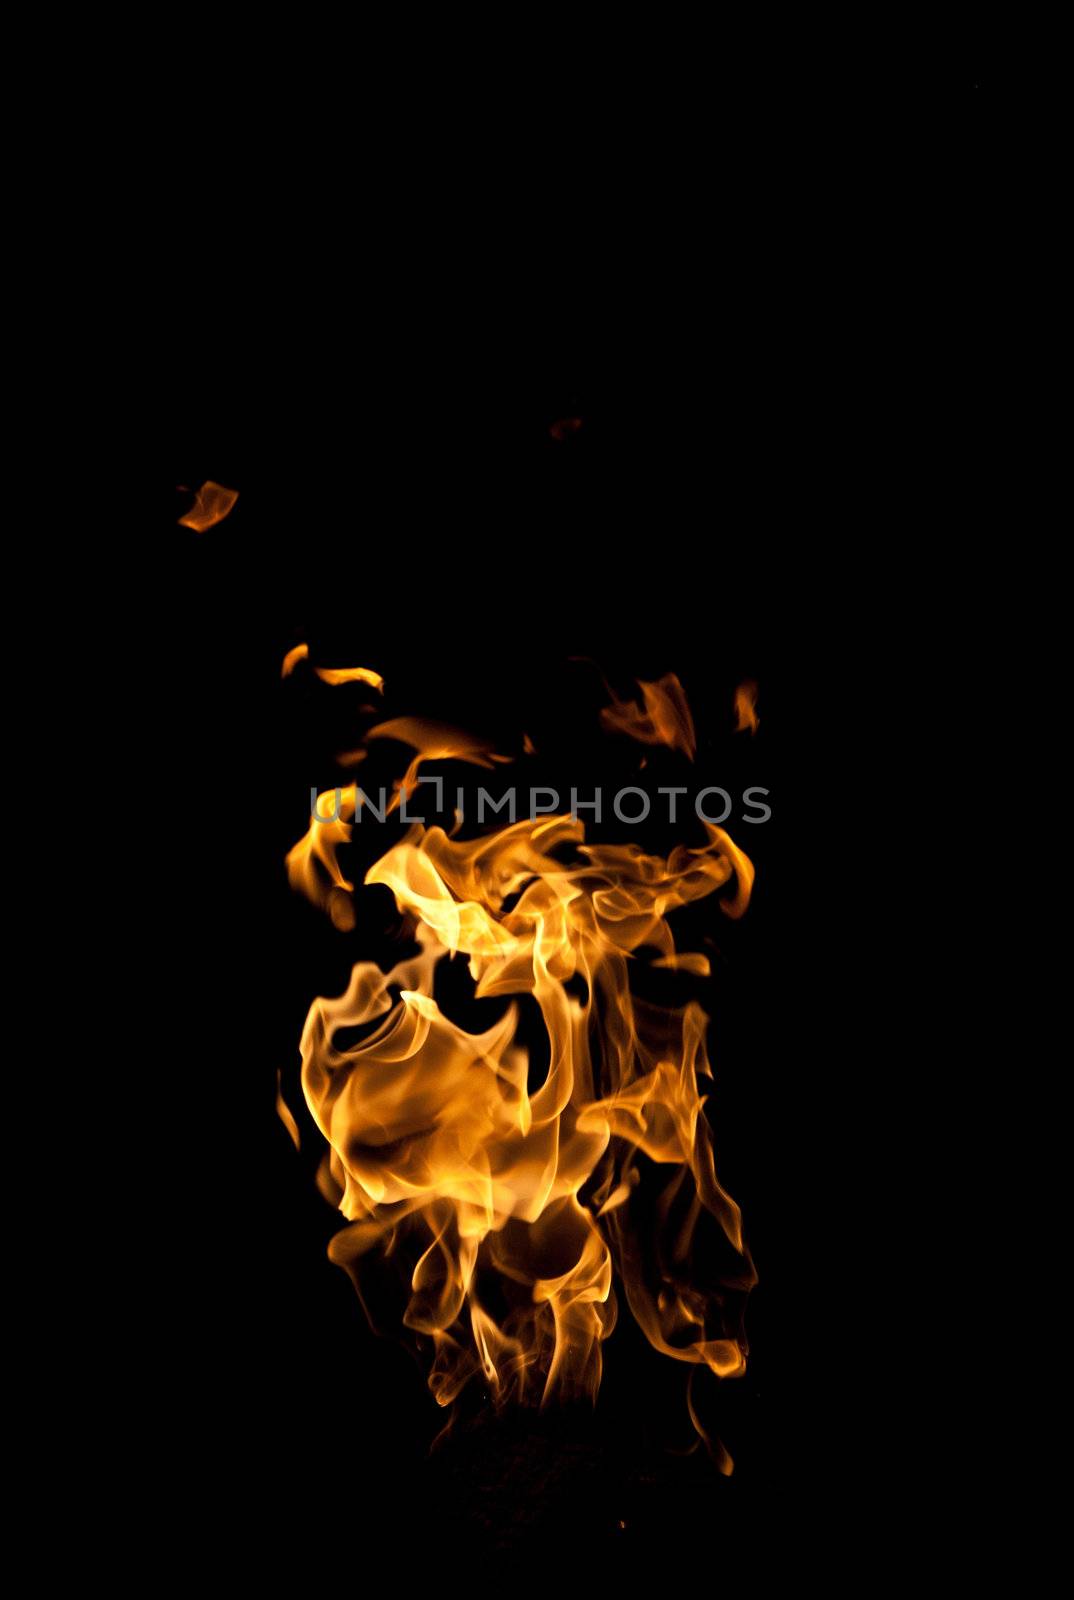 fire series: high flame over dark background